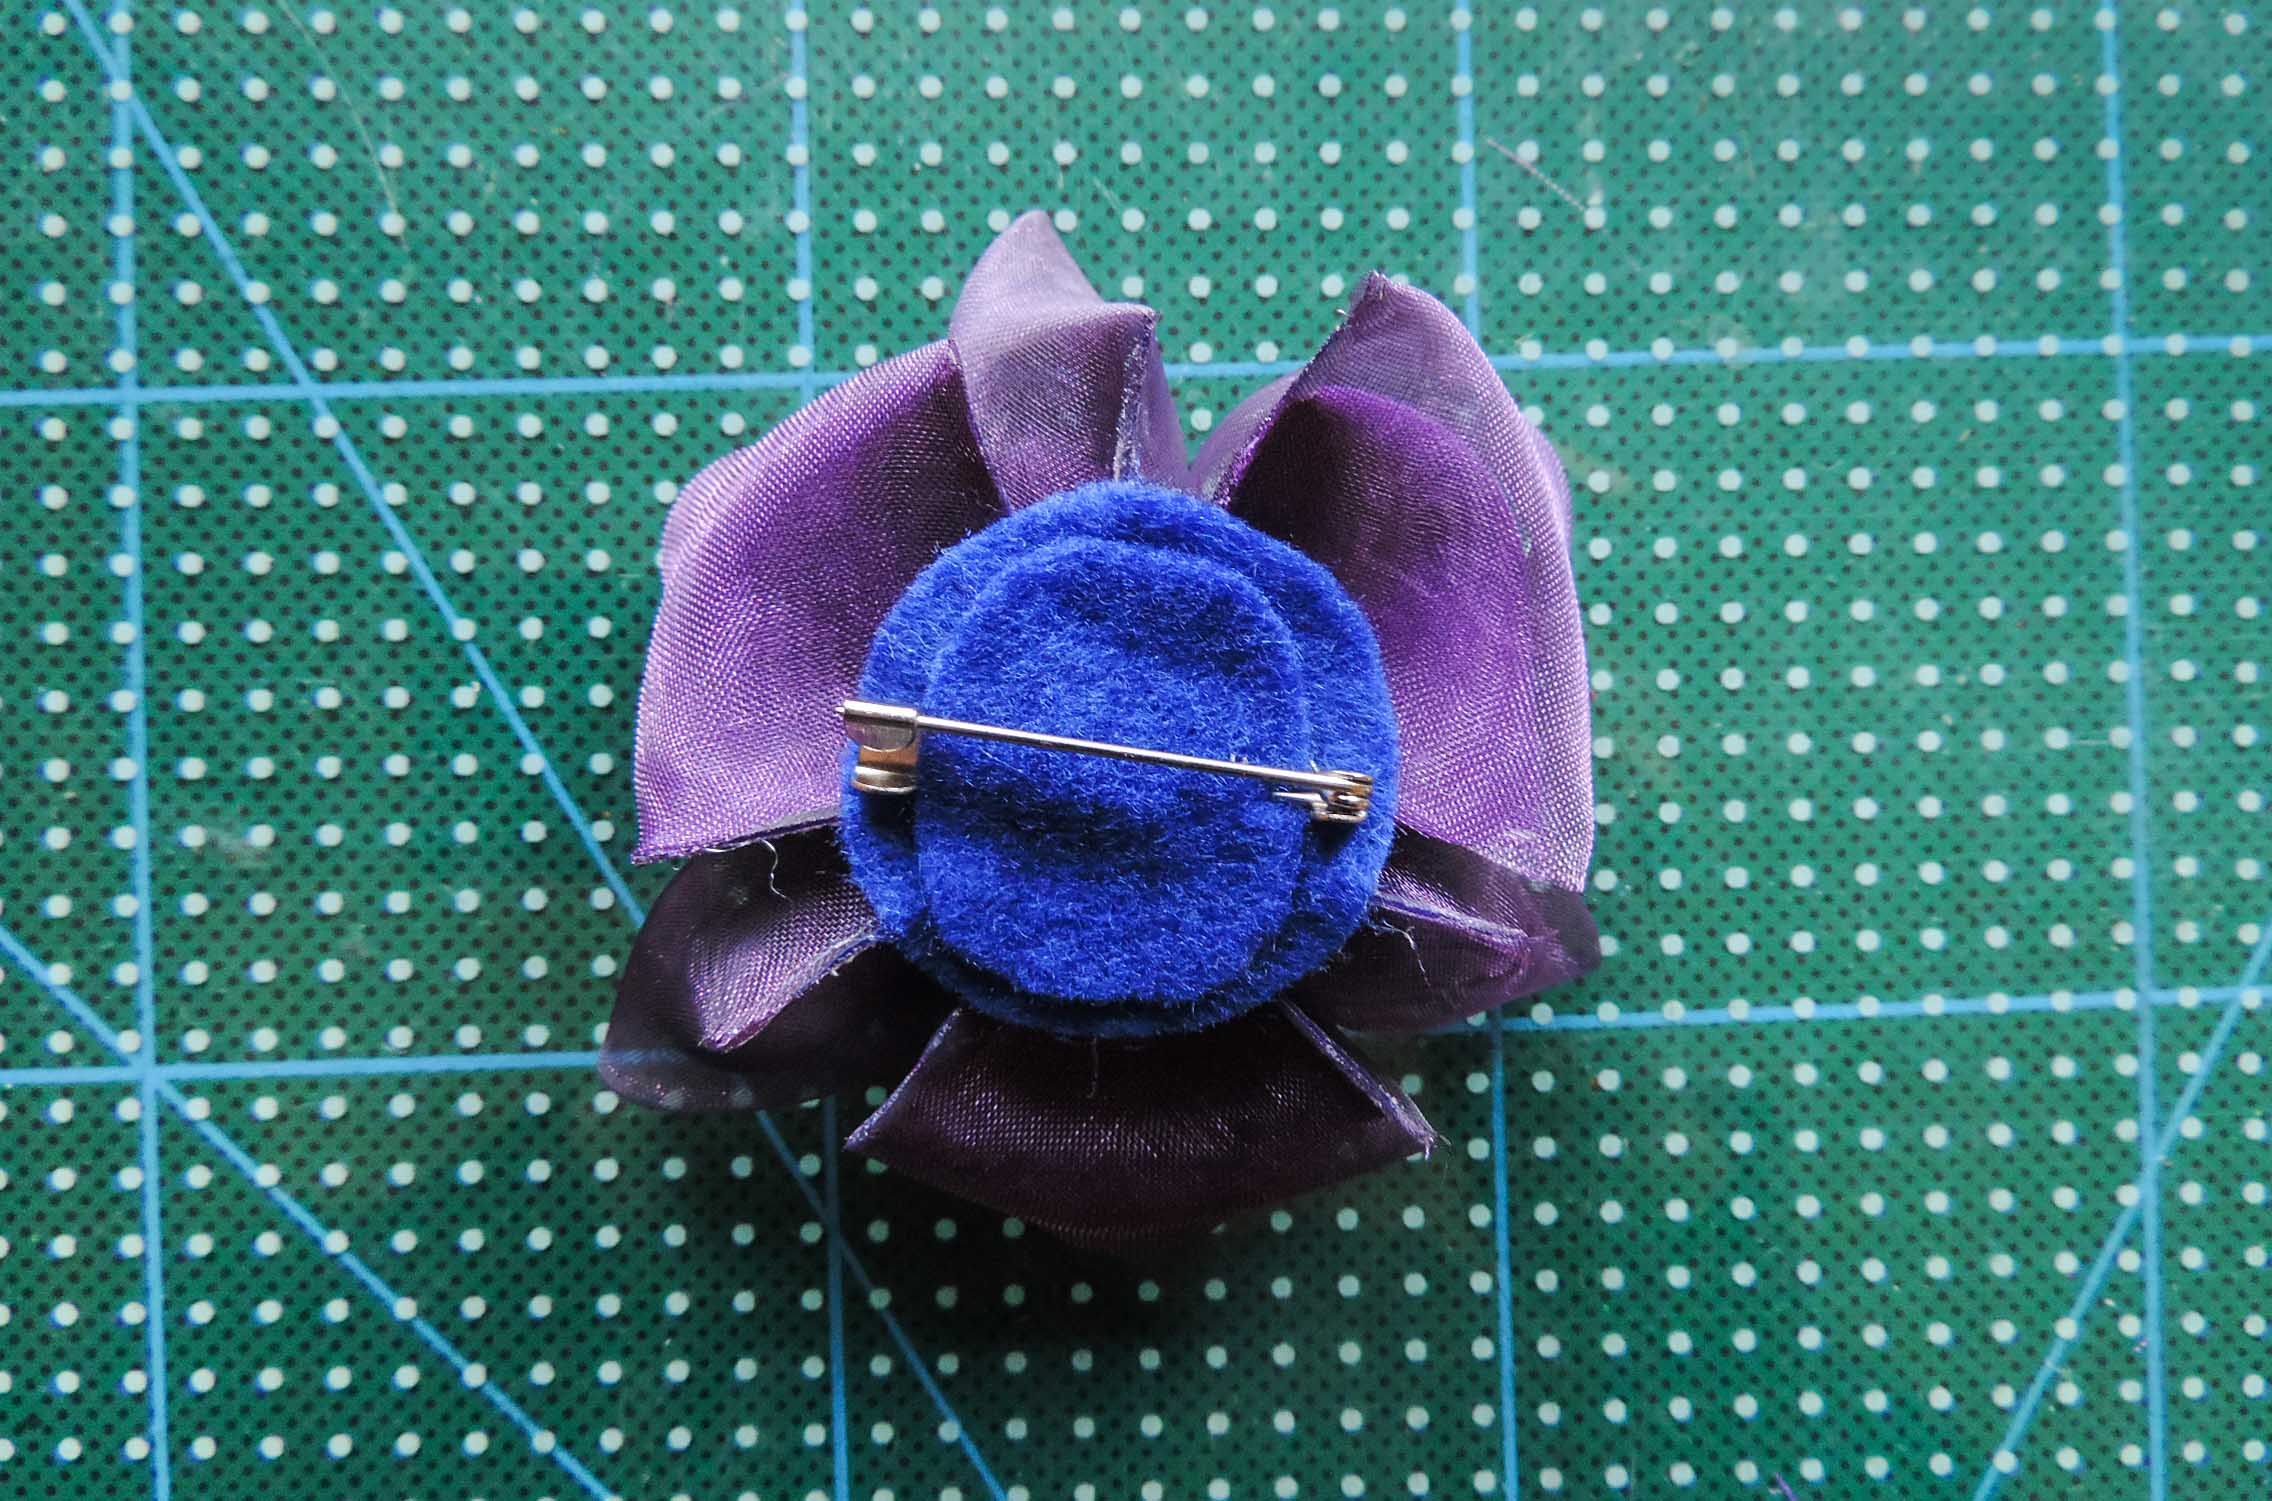 Iris flower tutorial - attaching the petals to the base 4